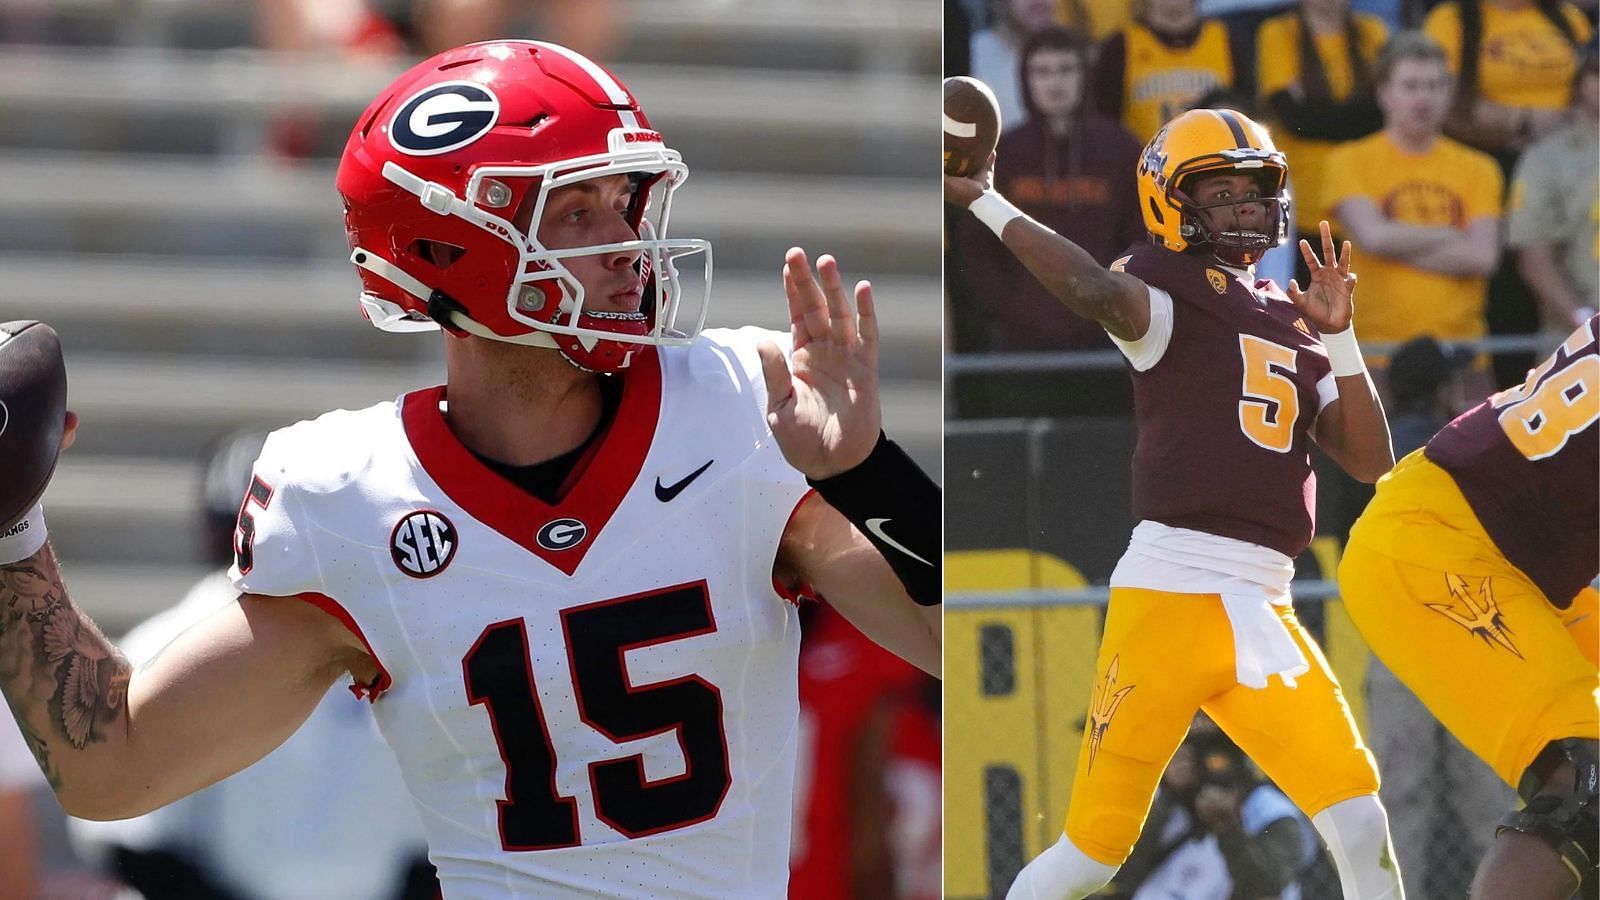 Georgia has two top QBs in Carson Beck and Jaden Rashada.